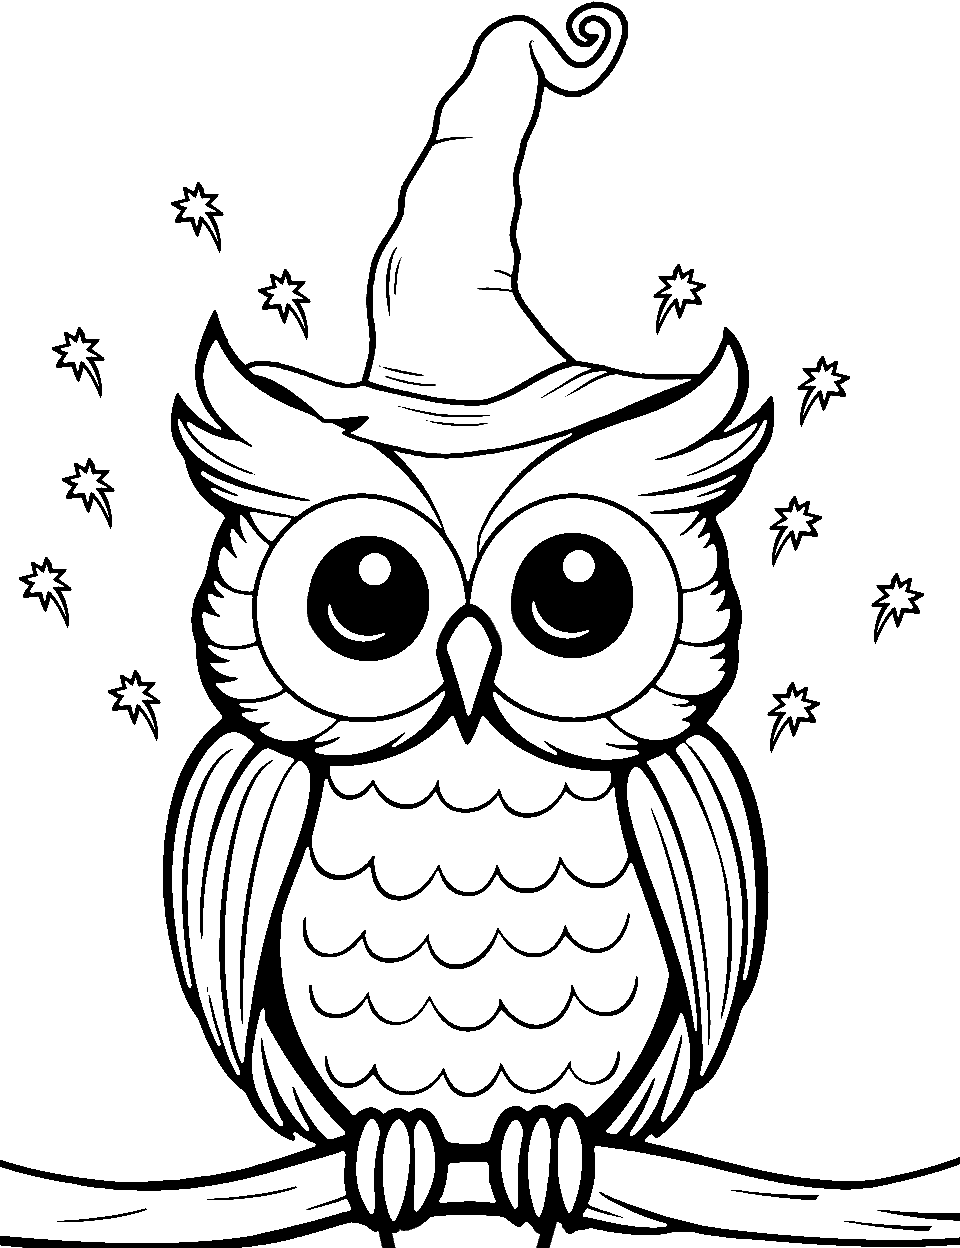 Wizard Owl Coloring Page - An owl wearing a wizard hat looking magical.